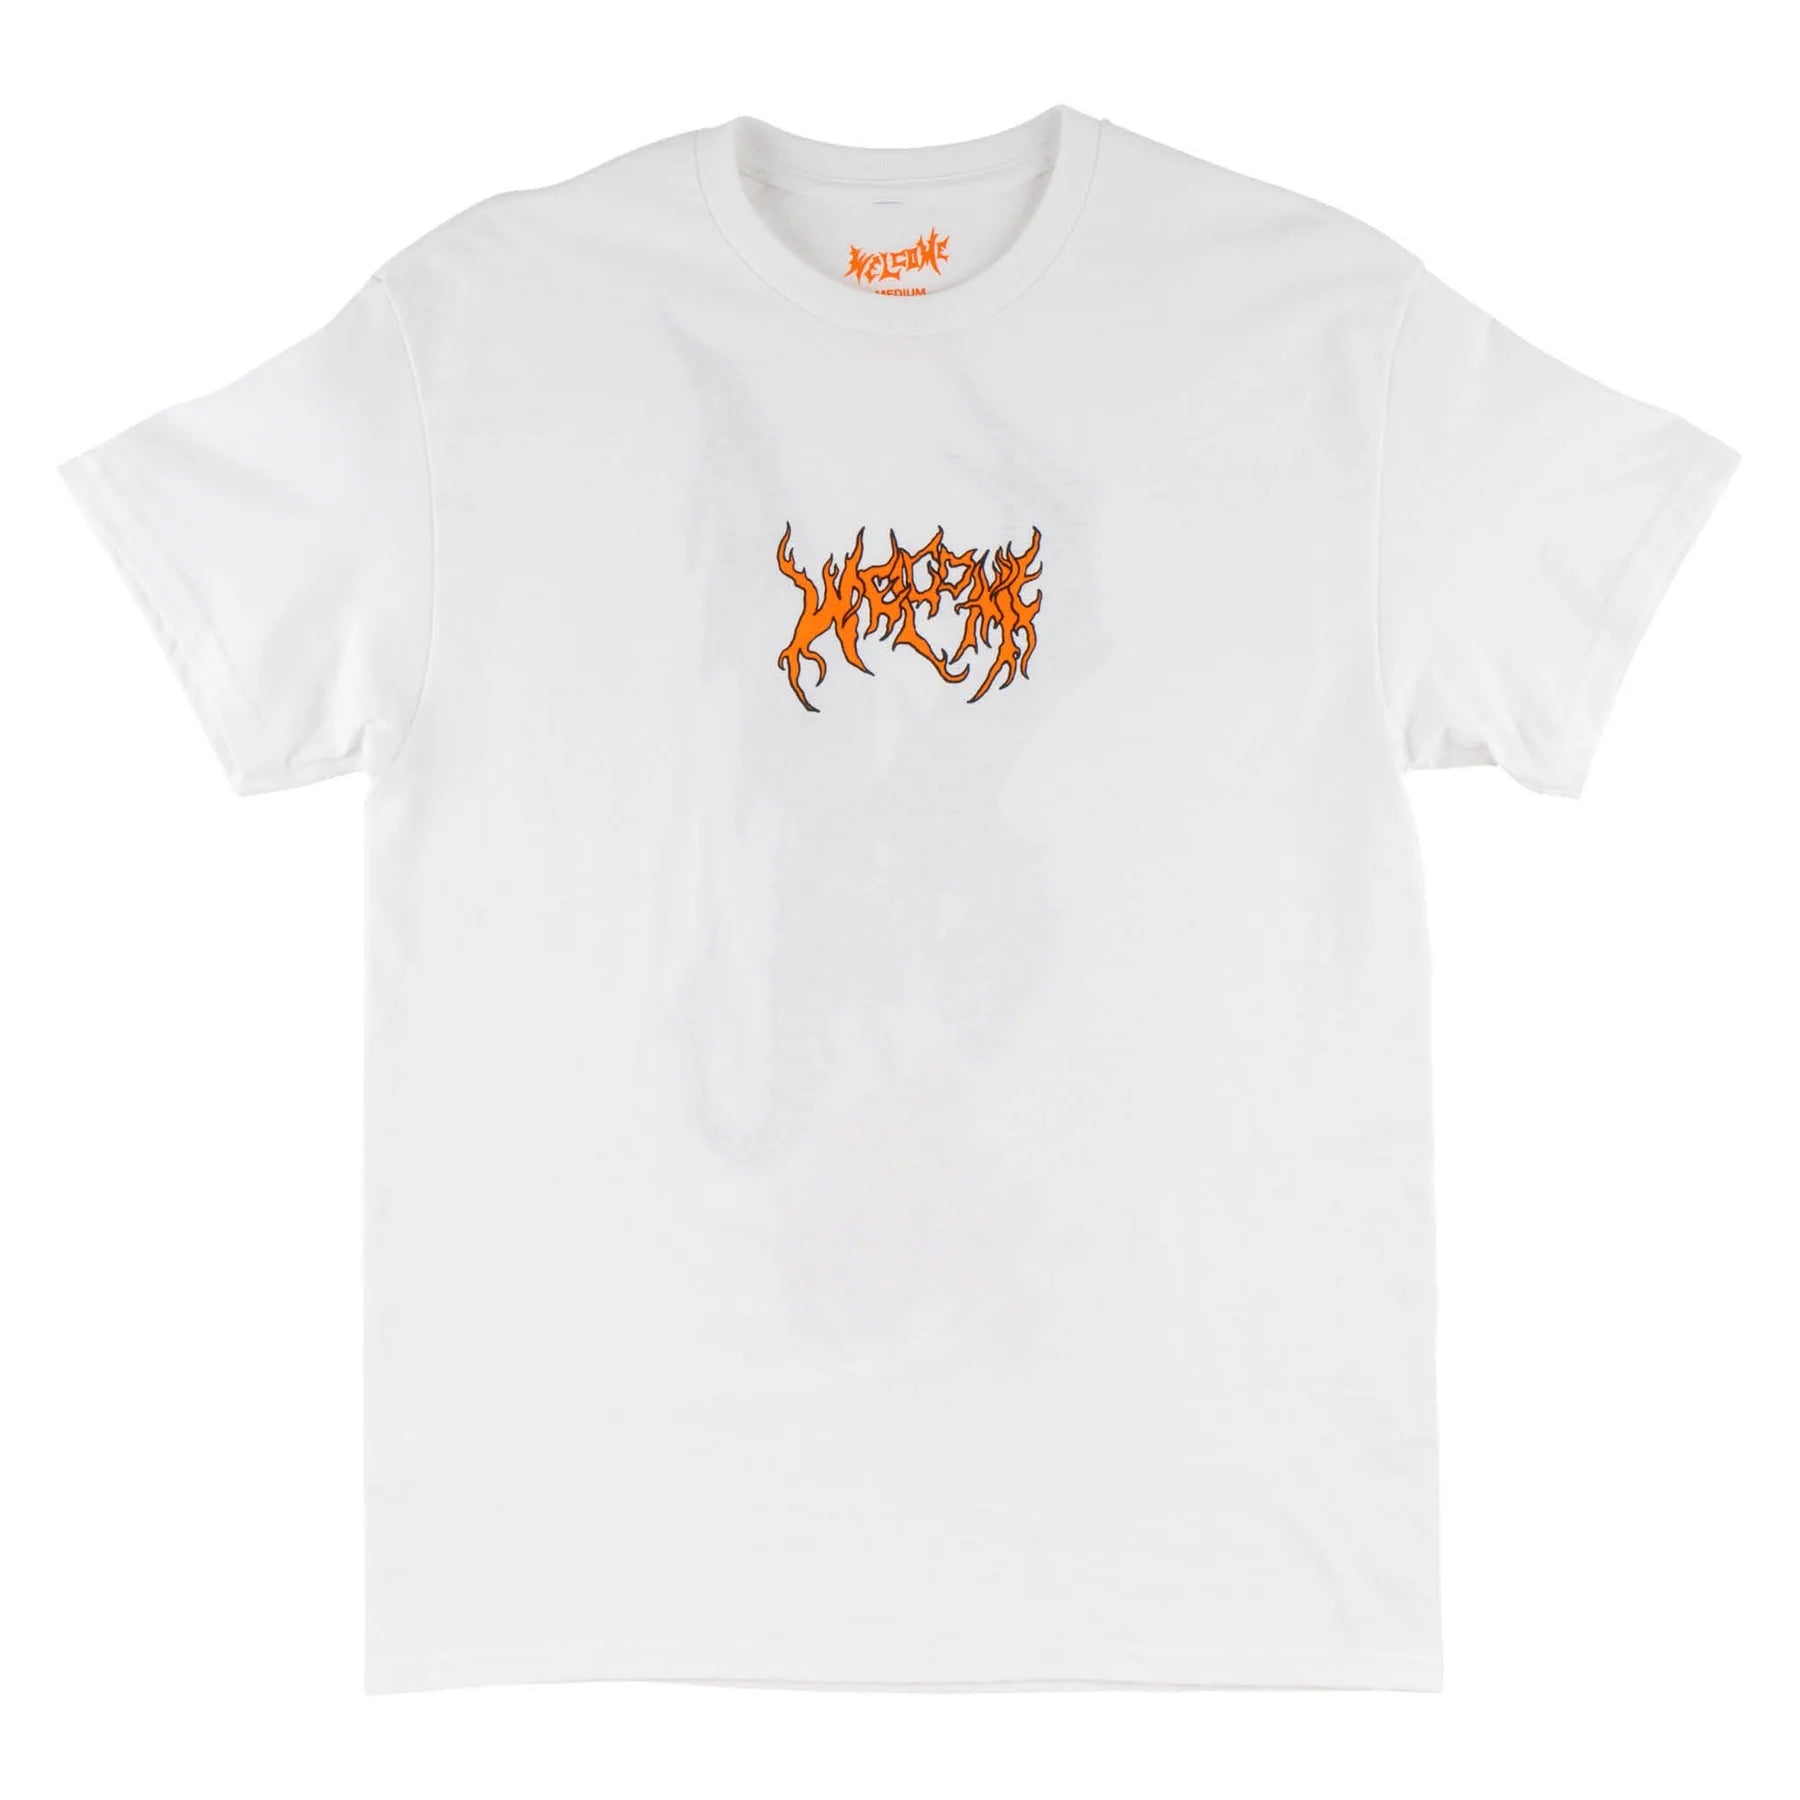 WELCOME Fire Breather T-Shirt White Men's Short Sleeve T-Shirts Welcome 